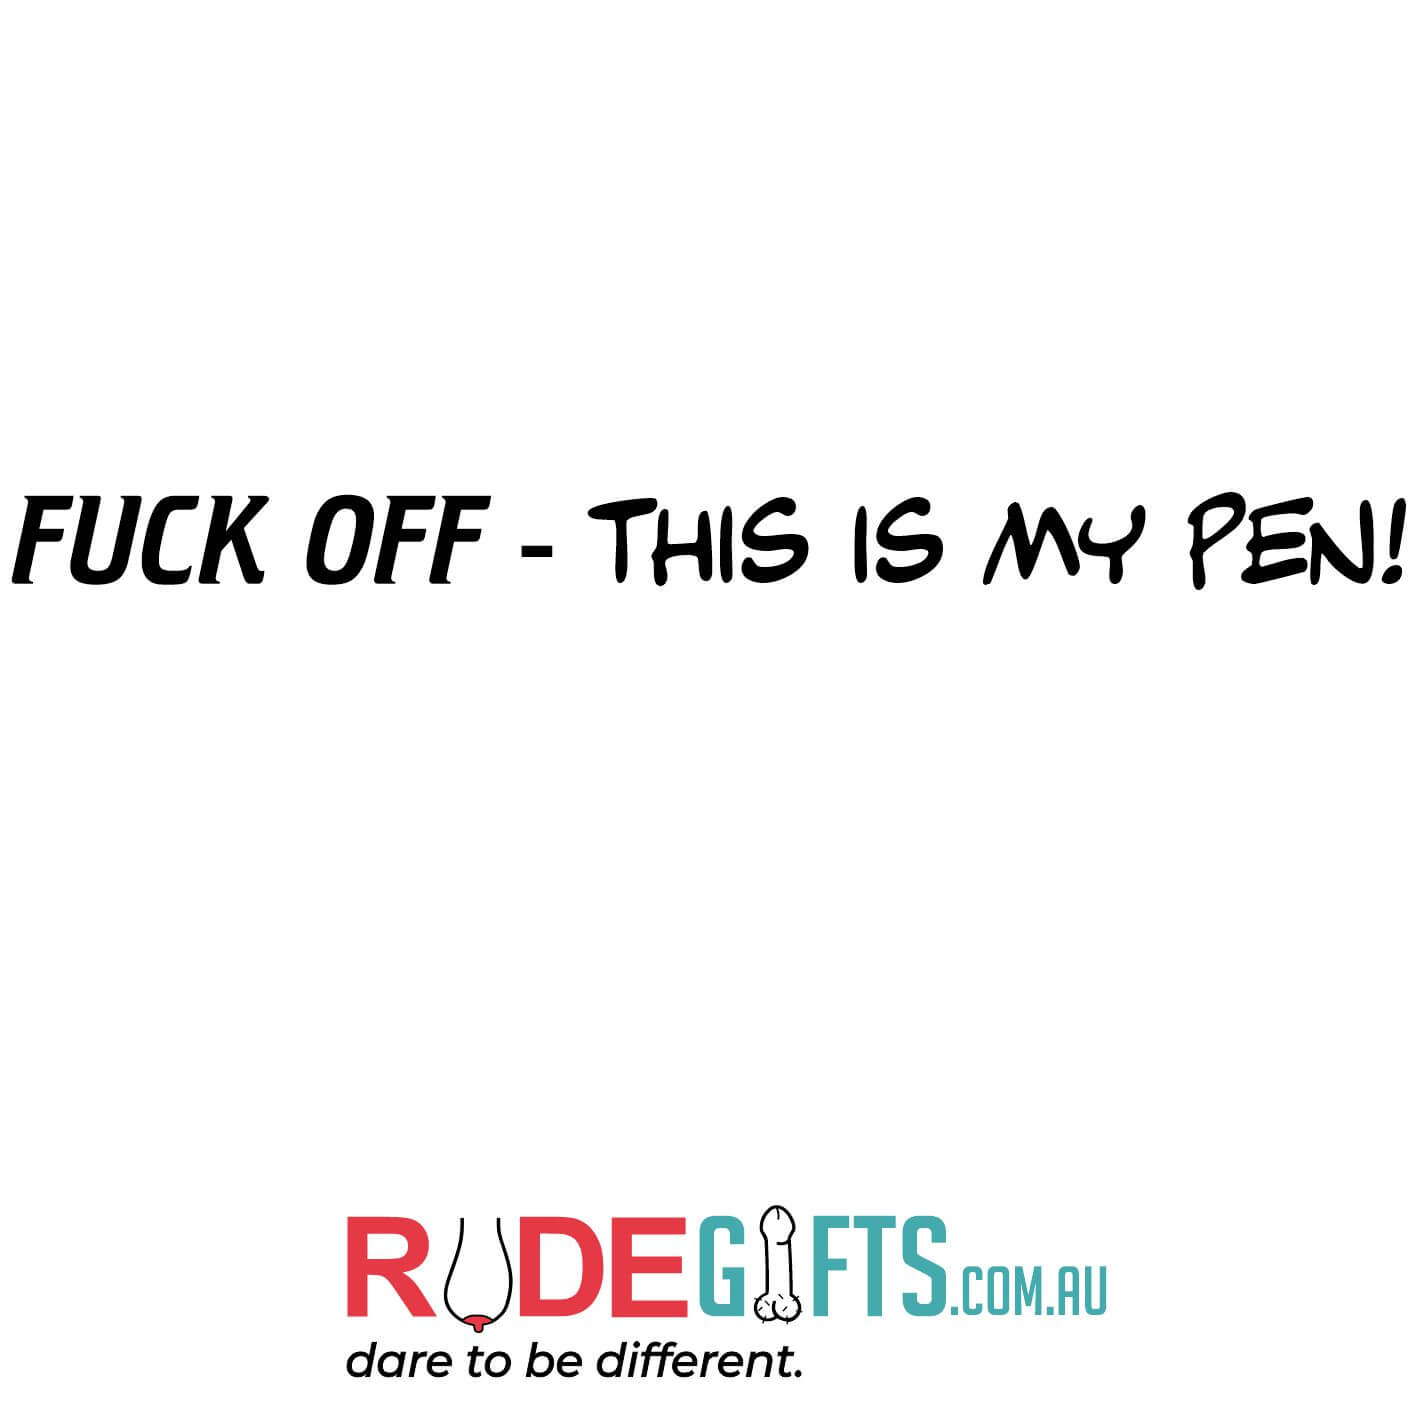 FUCK OFF - This is my pen! - 0